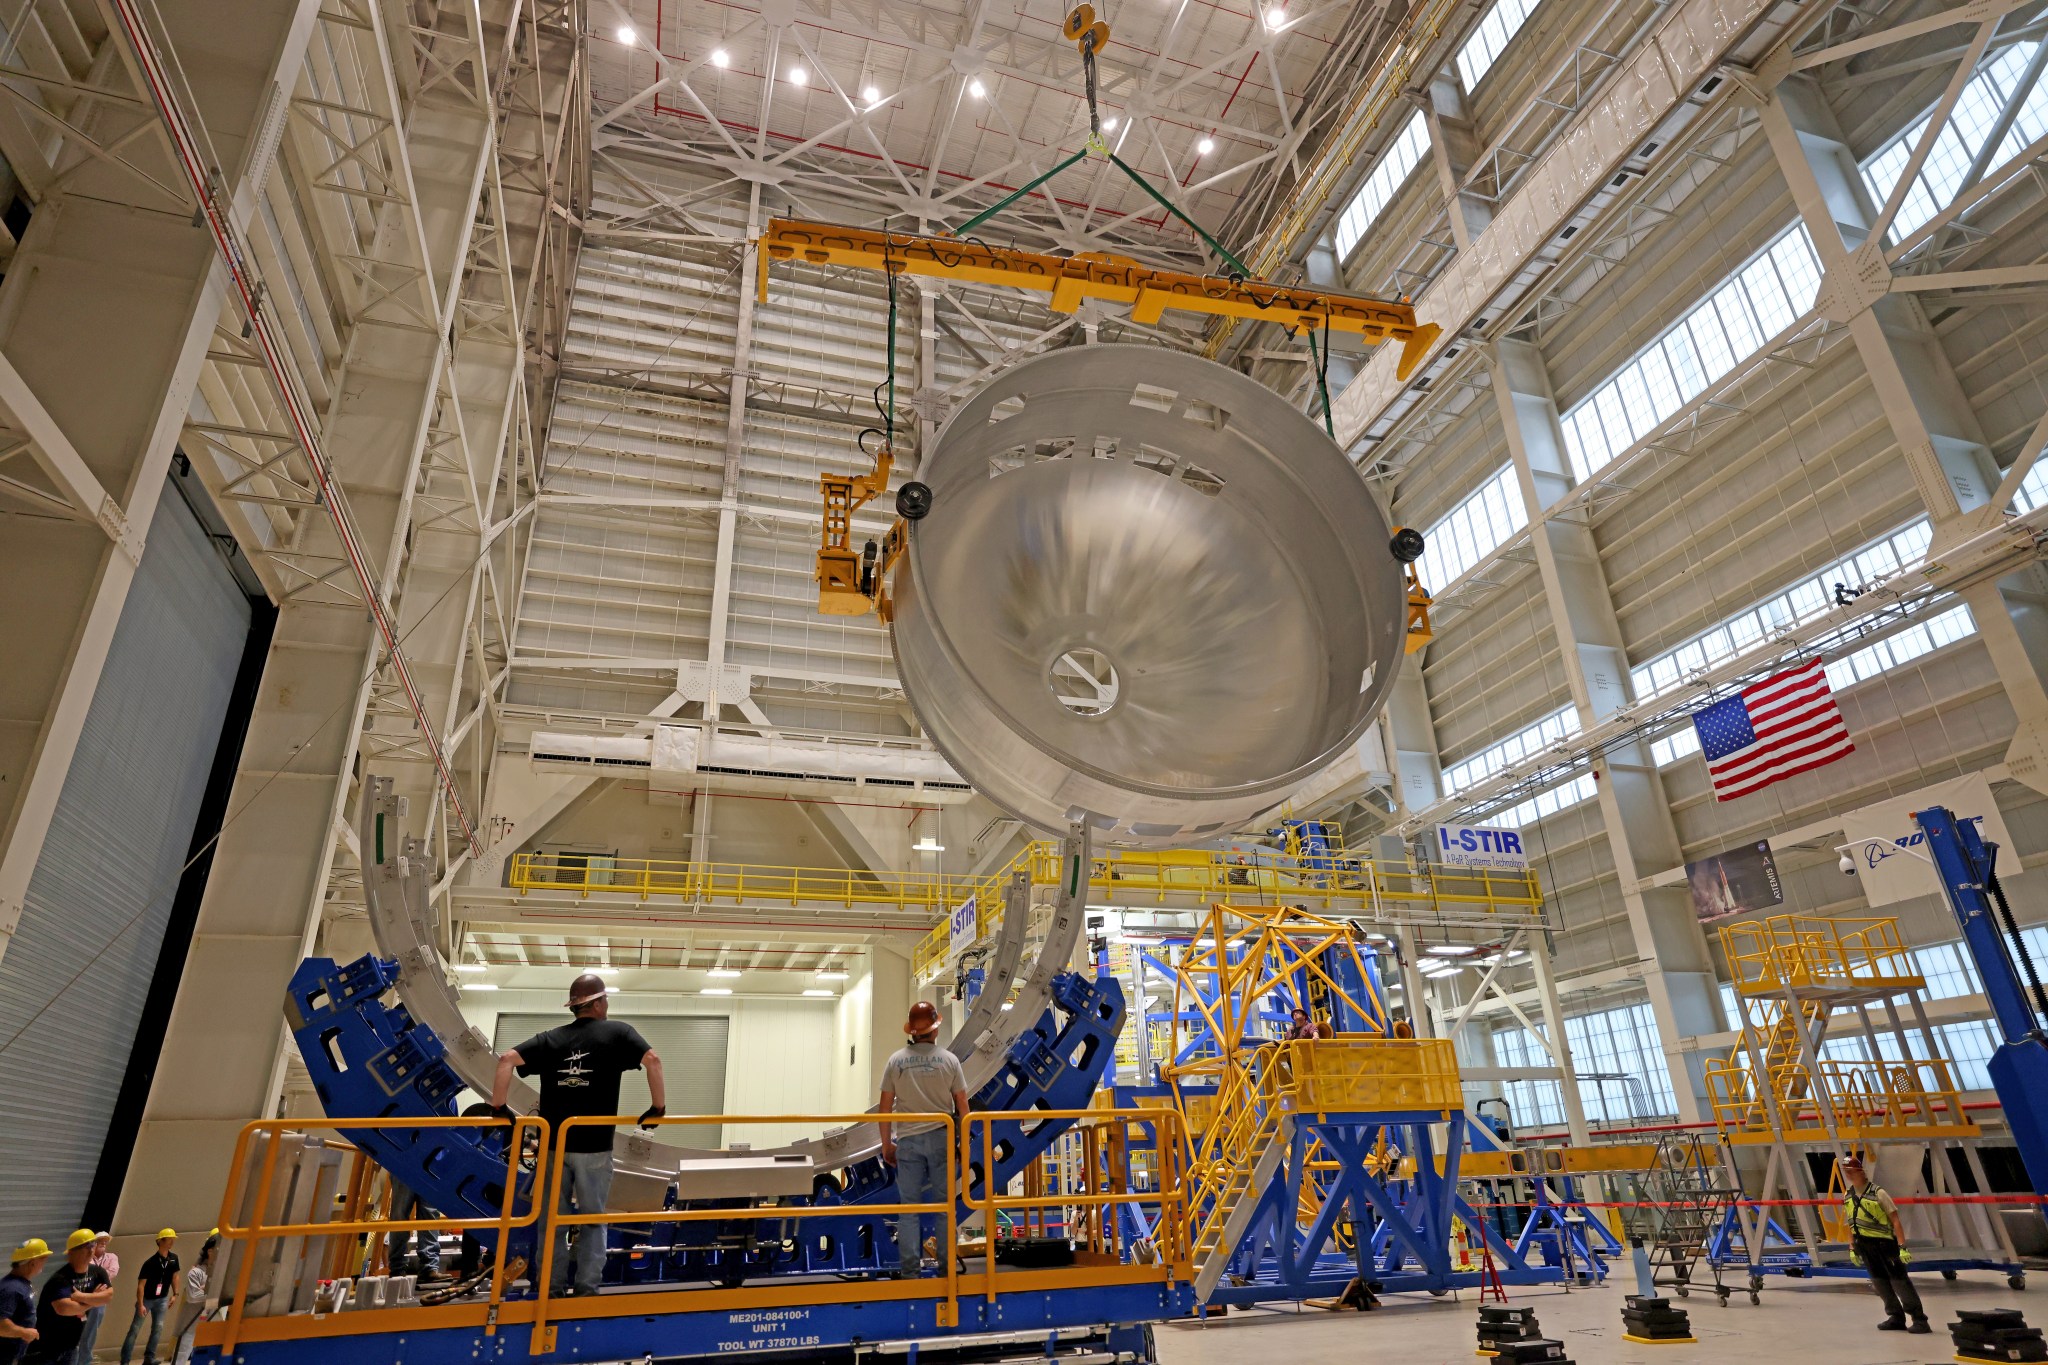 Technicians at NASA’s Michoud Assembly Facility in New Orleans have completed a major portion of a weld confidence article for the advanced upper stage of NASA’s SLS (Space Launch System) rocket. The hardware was rotated to a horizontal position and moved to another part of the facility Oct. 24.